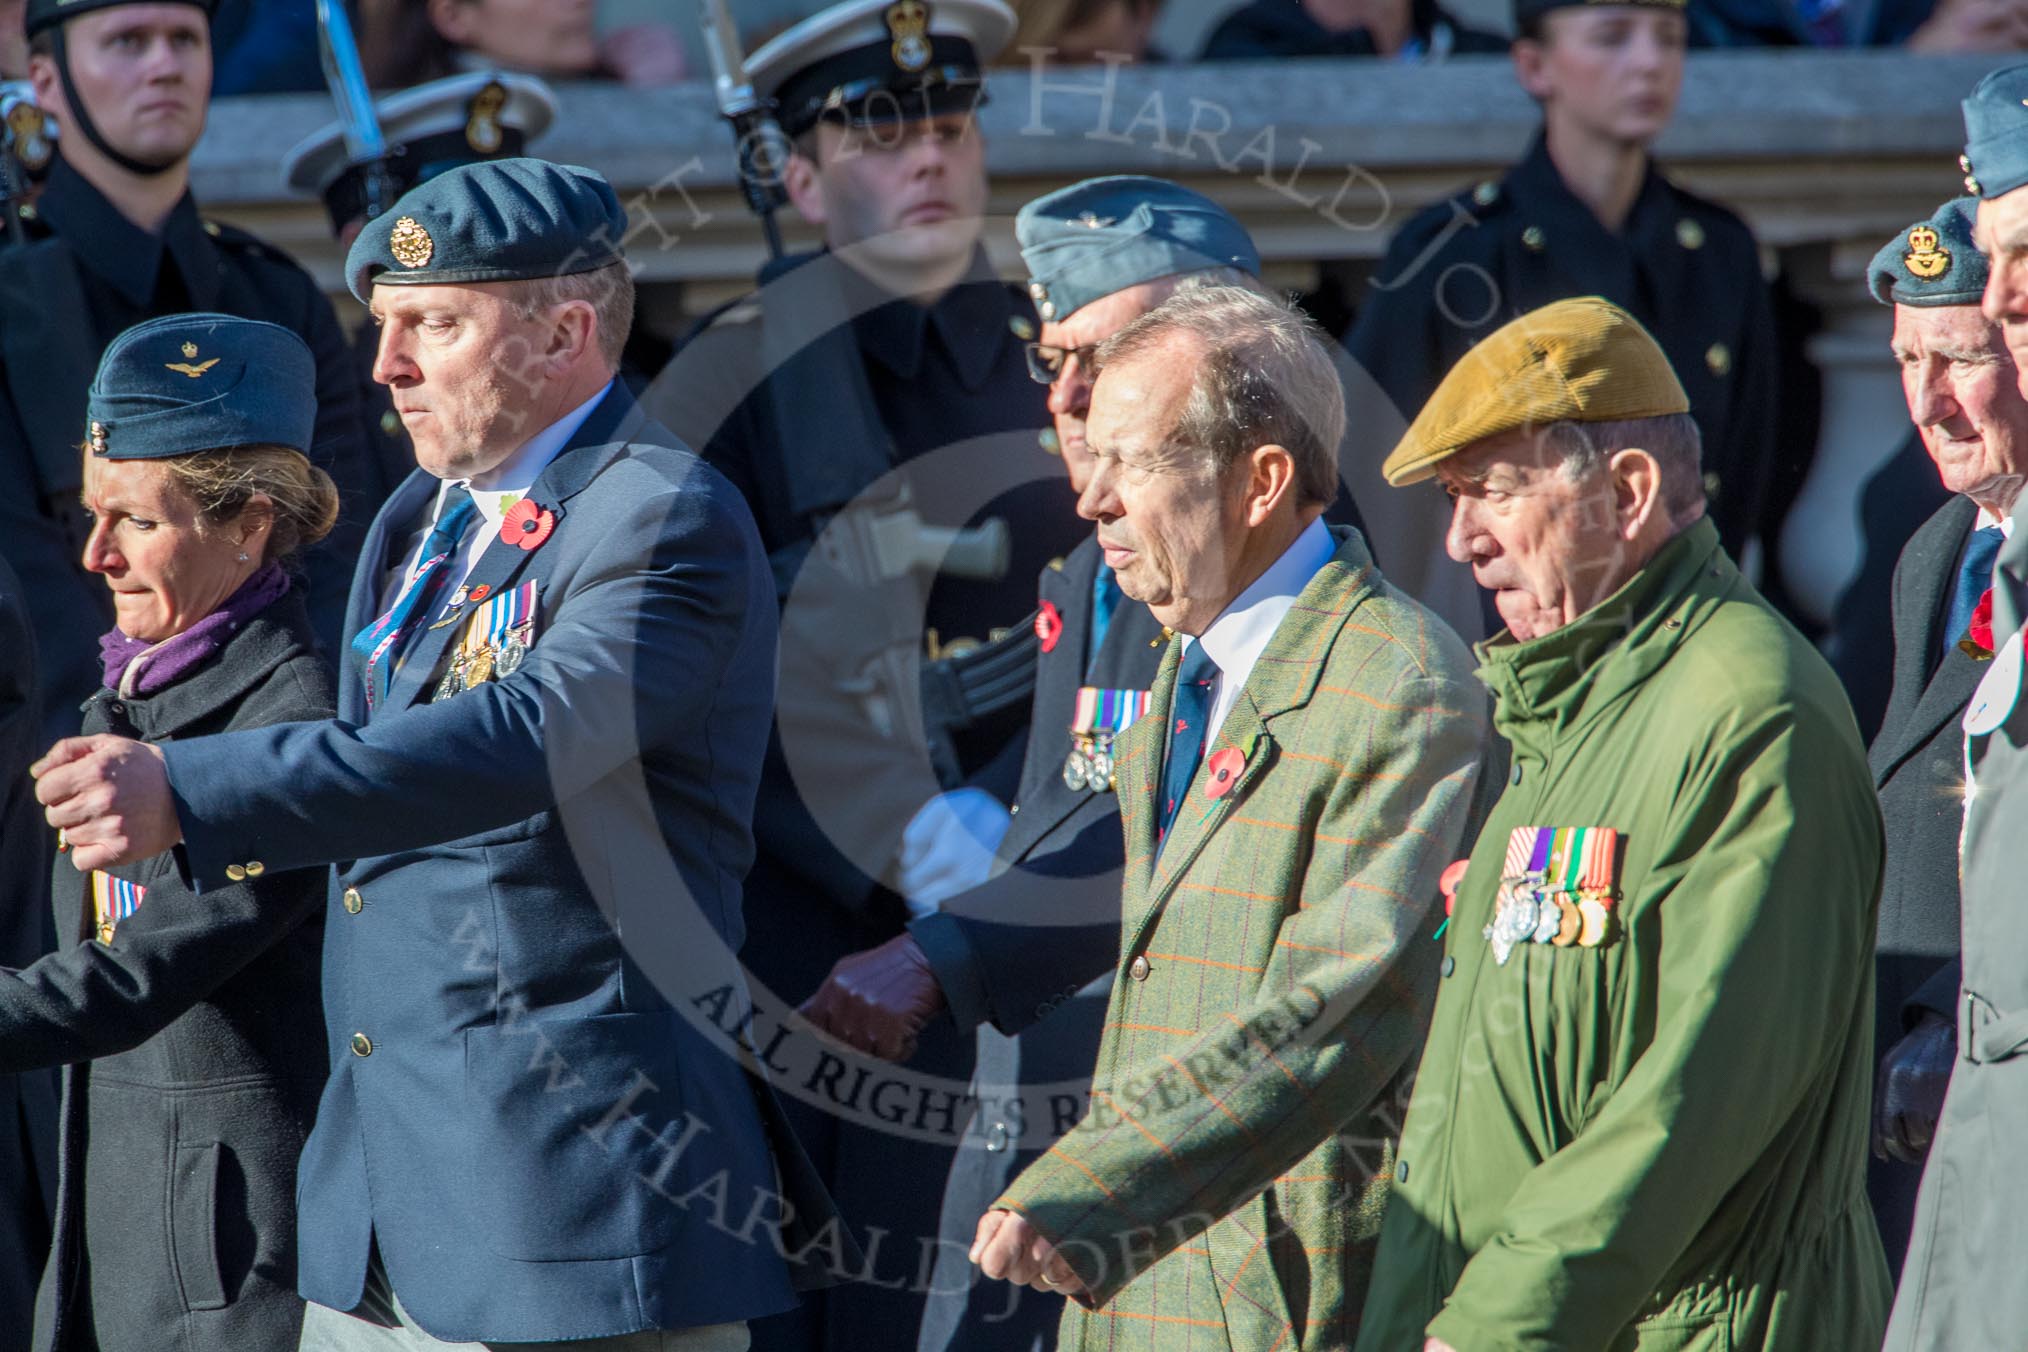 6 Squadron (Royal Air Force) Association (Group C7, 16 members) during the Royal British Legion March Past on Remembrance Sunday at the Cenotaph, Whitehall, Westminster, London, 11 November 2018, 12:15.